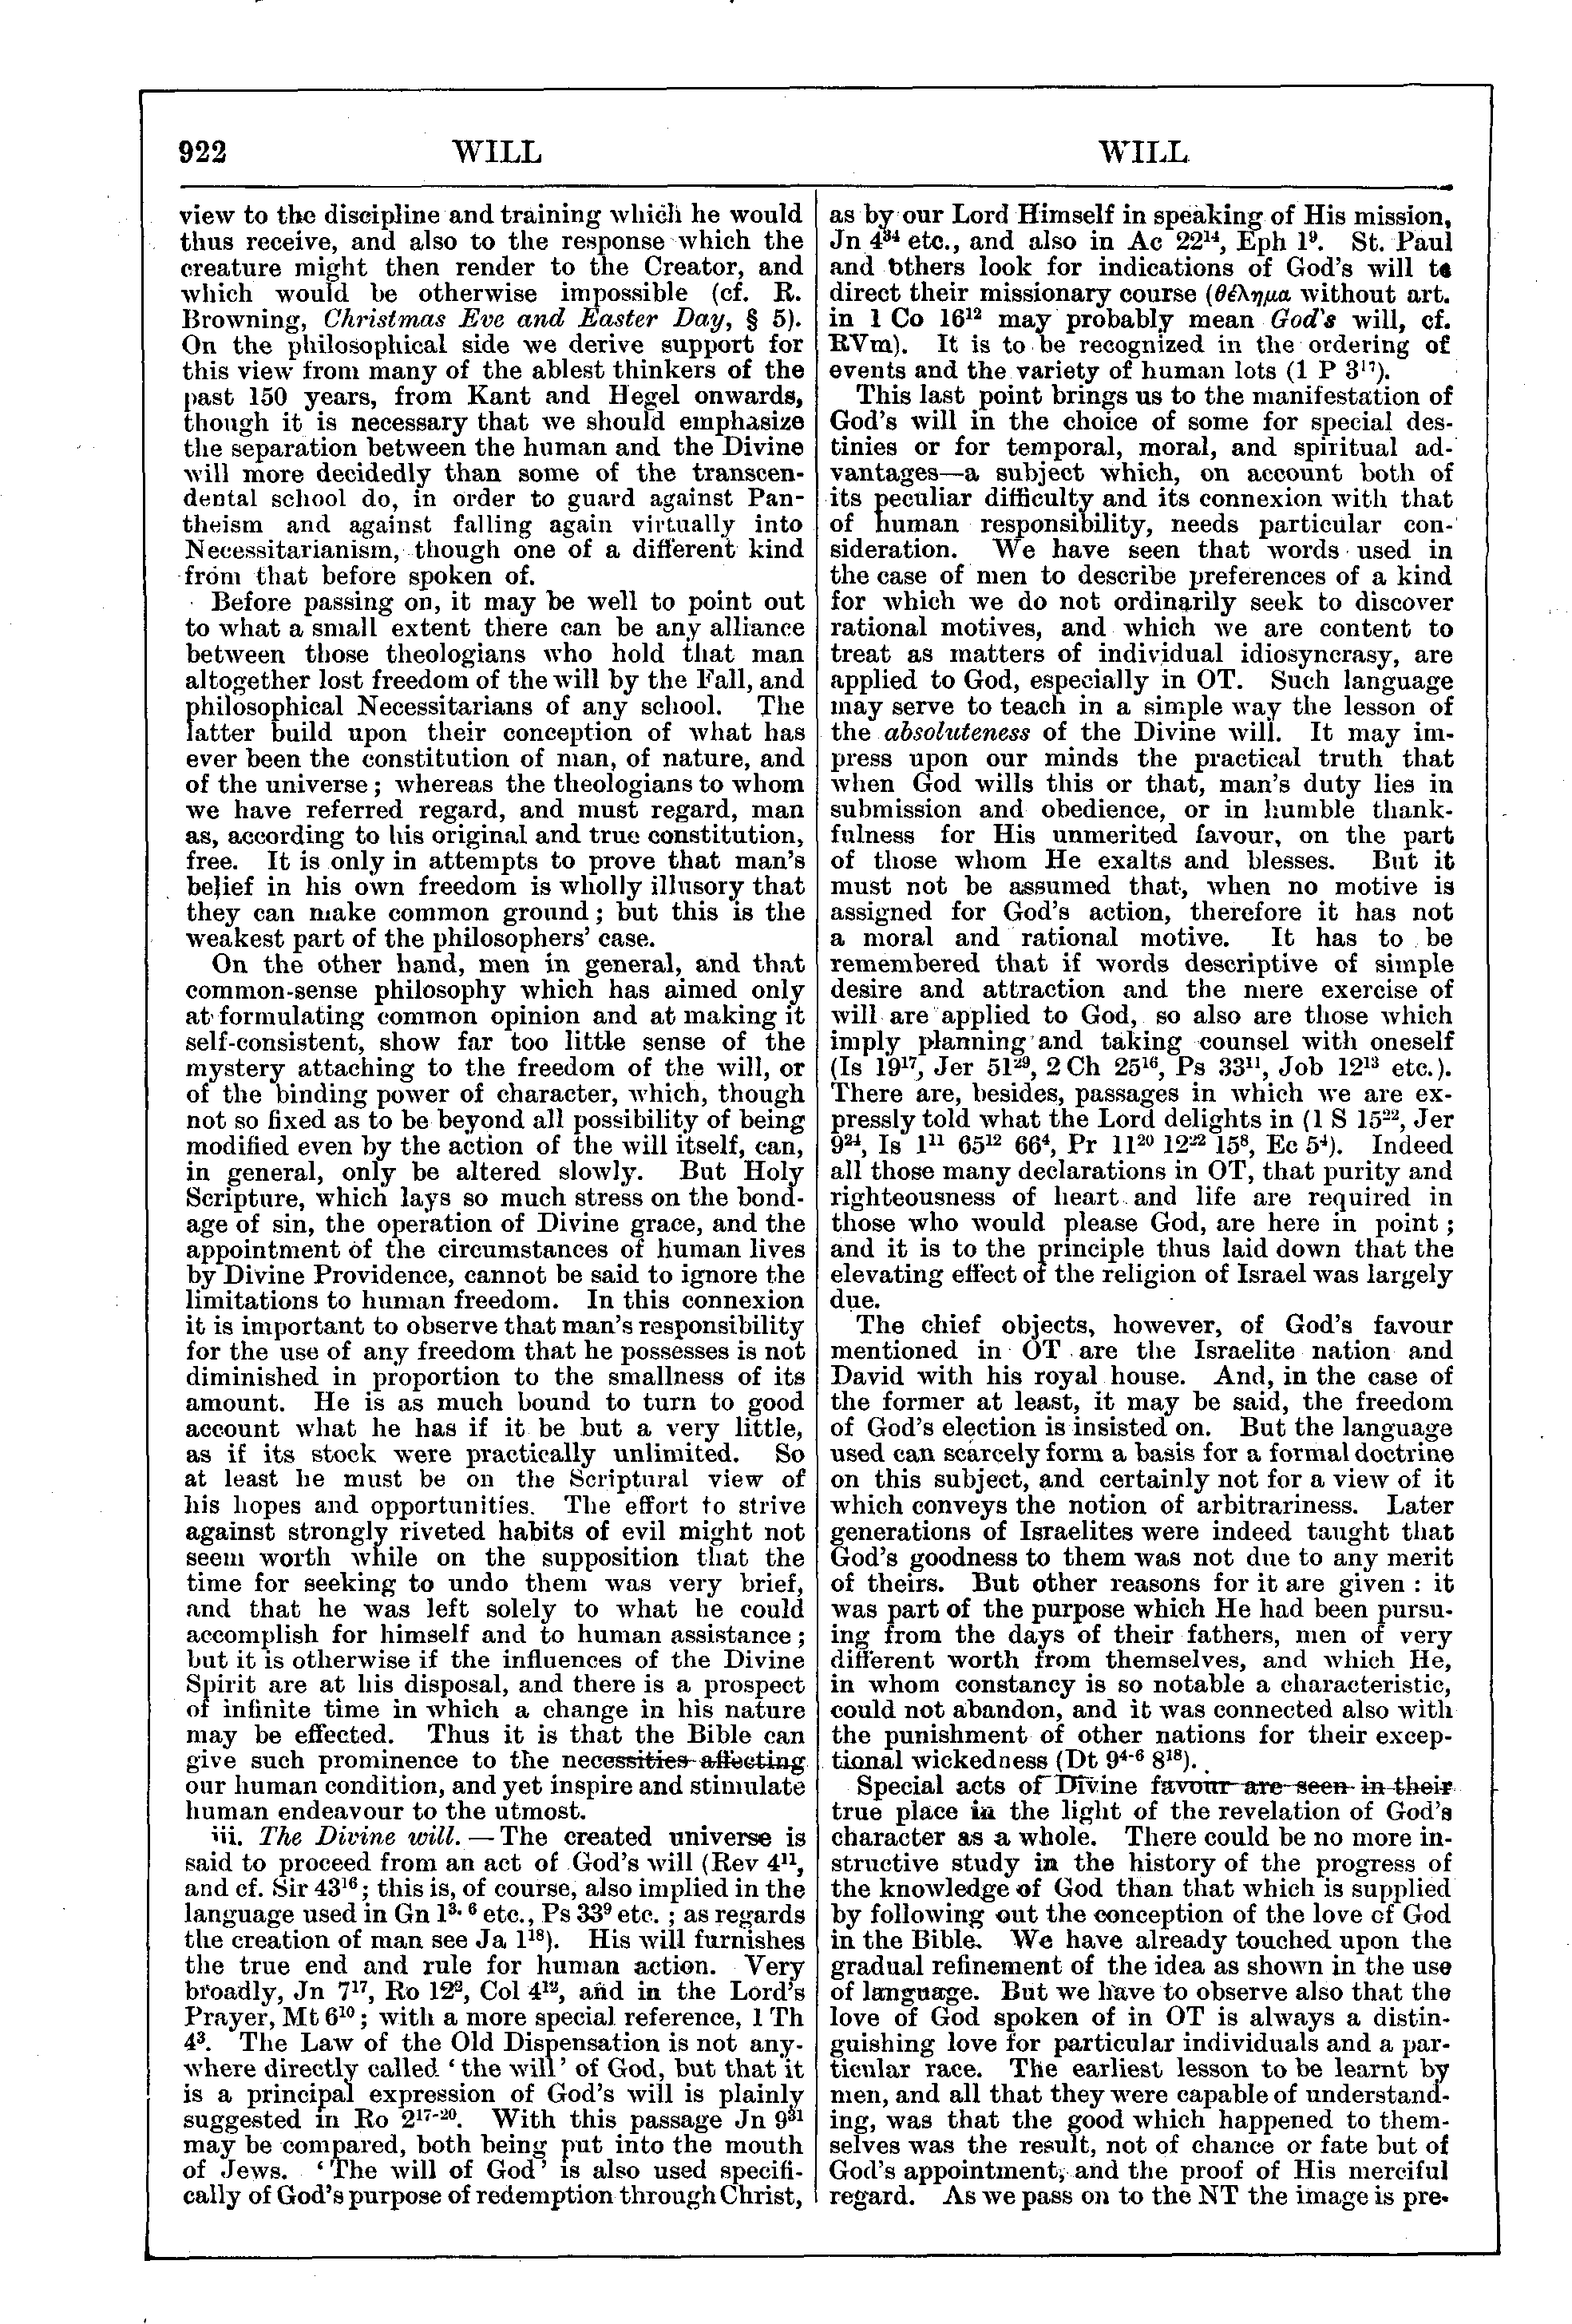 Image of page 922